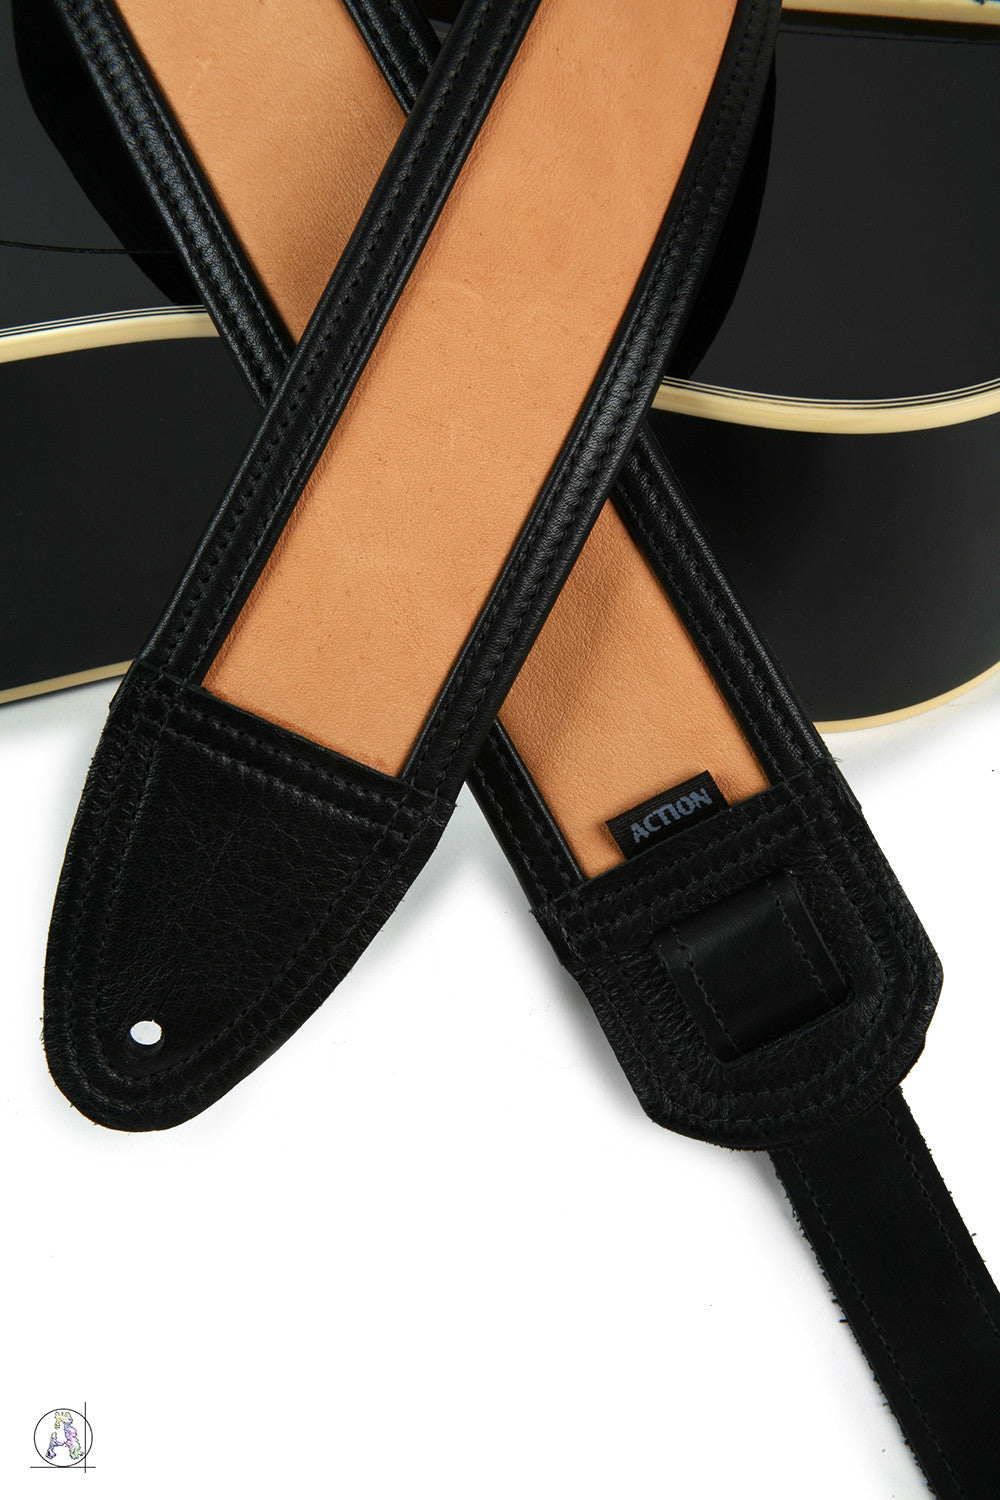 Black and Mellow Tan Soft Leather Guitar Strap